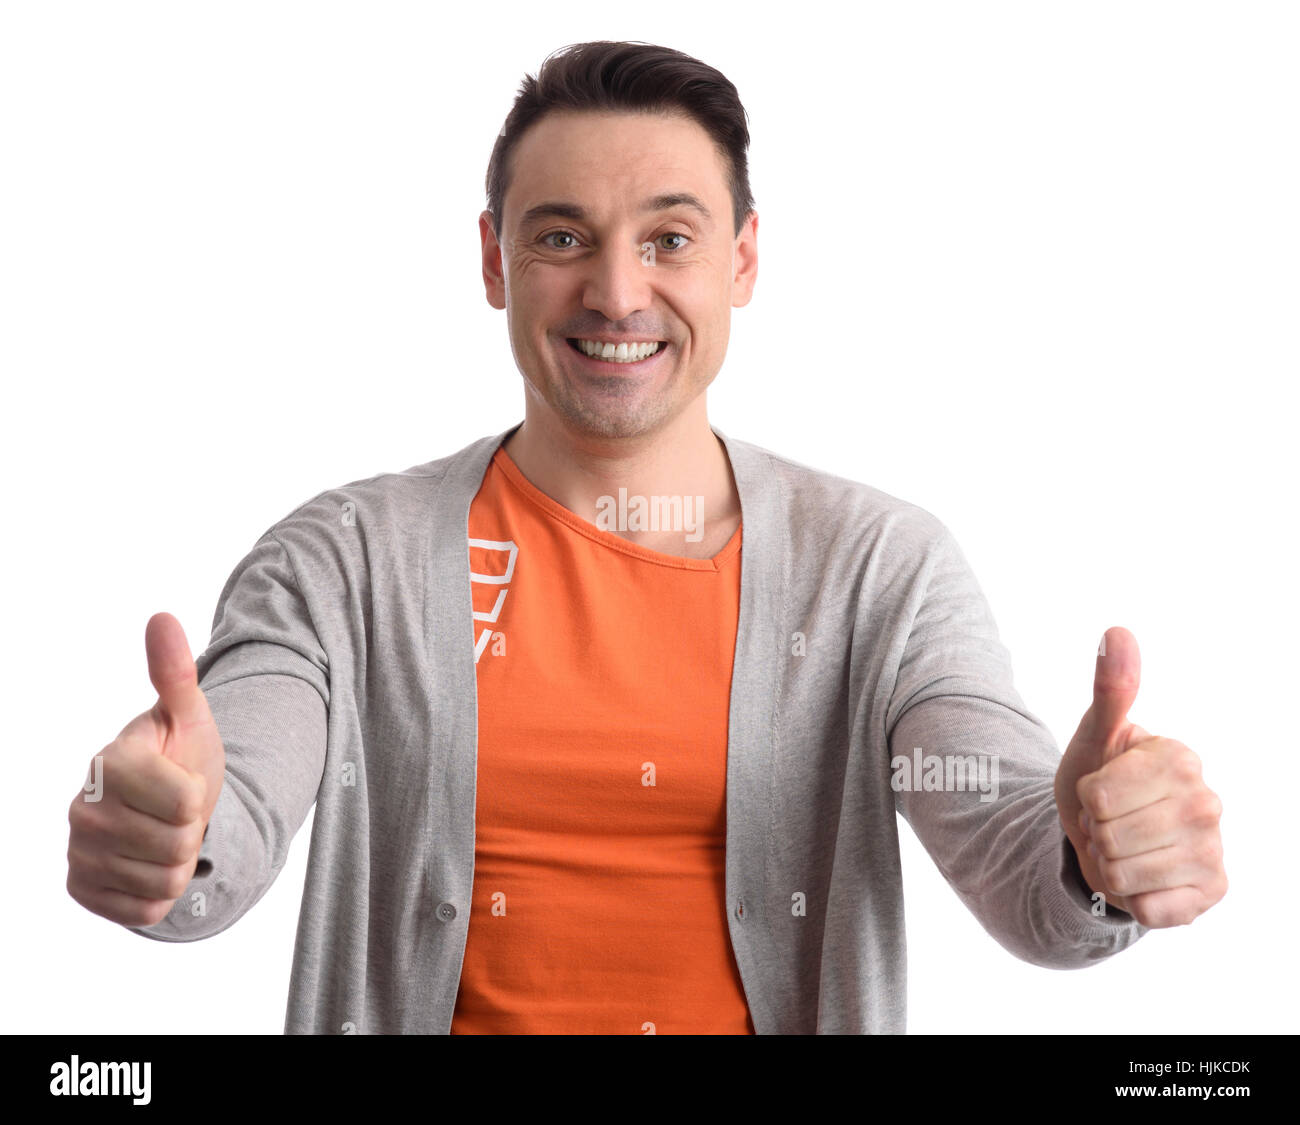 successful man shows his thumbs up. Isolated on white background Stock Photo